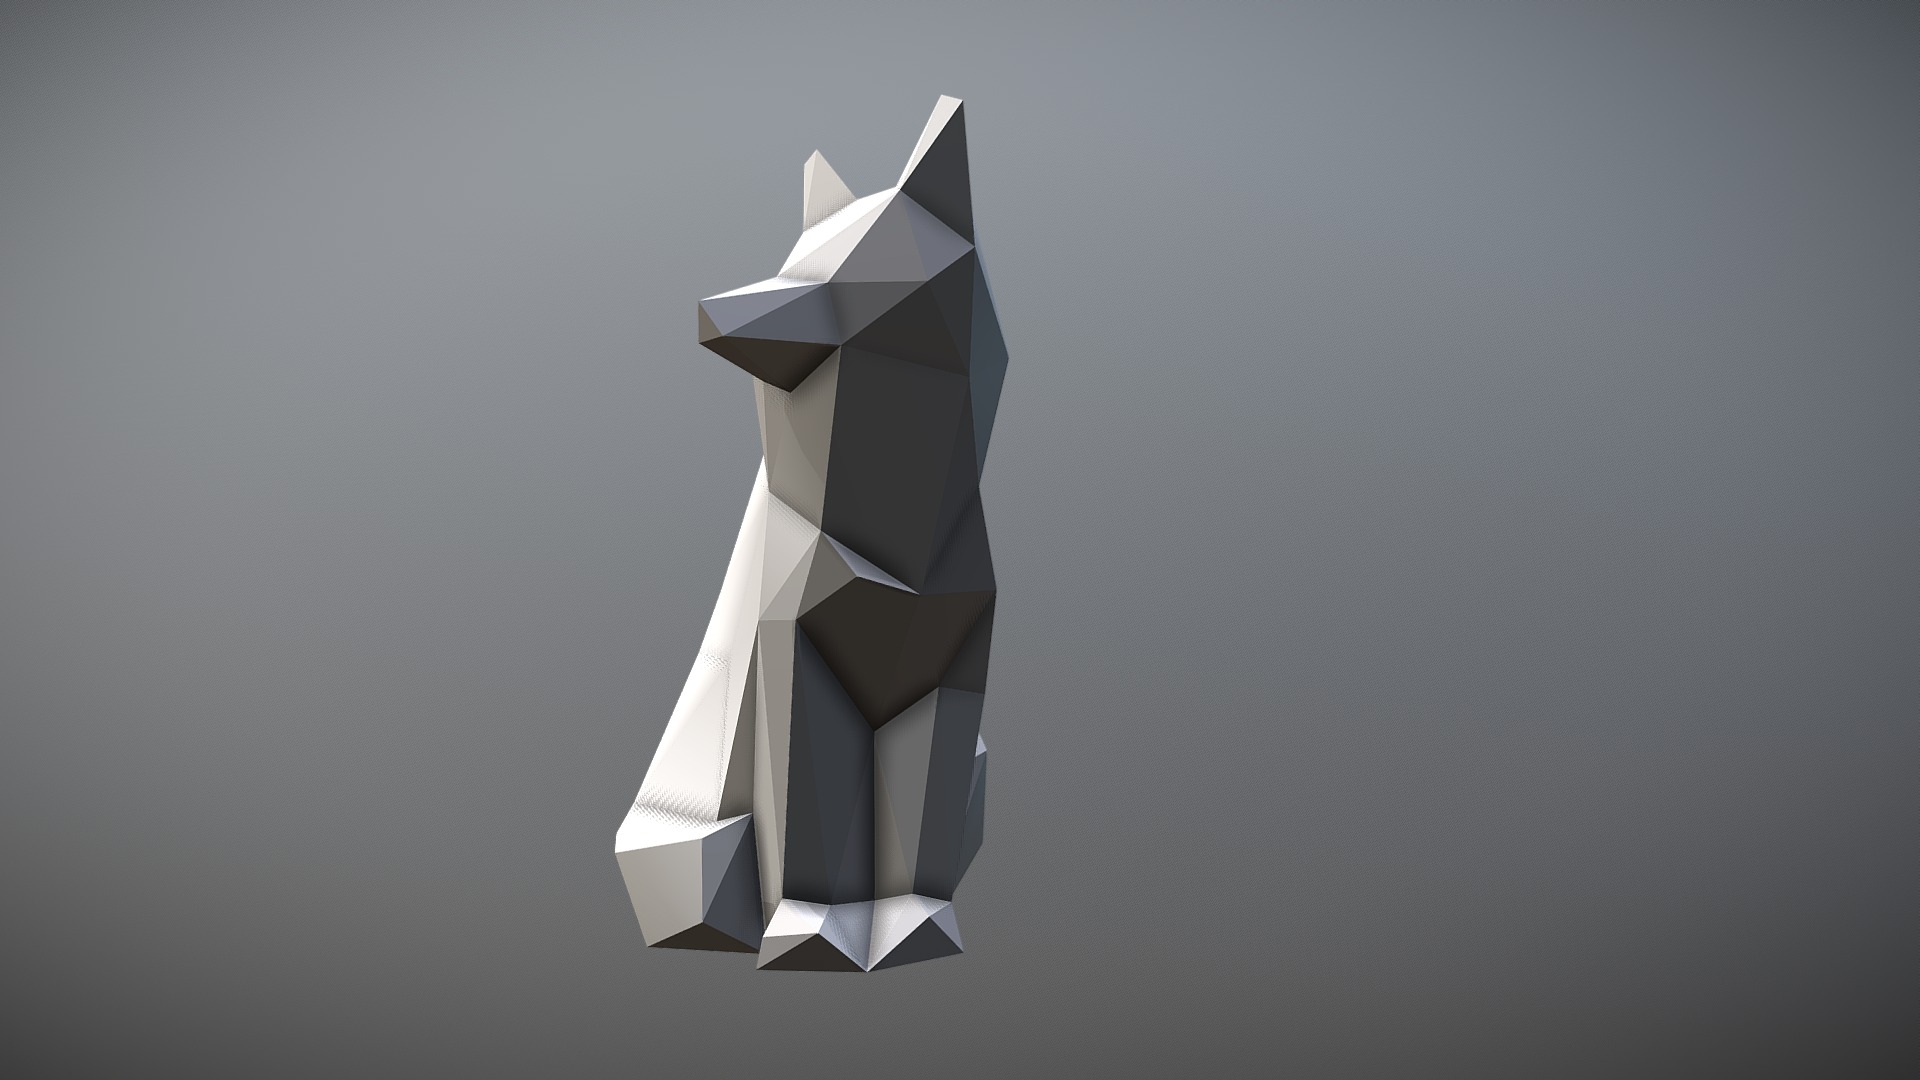 3D model Fox - This is a 3D model of the Fox. The 3D model is about a white paper origami bird.